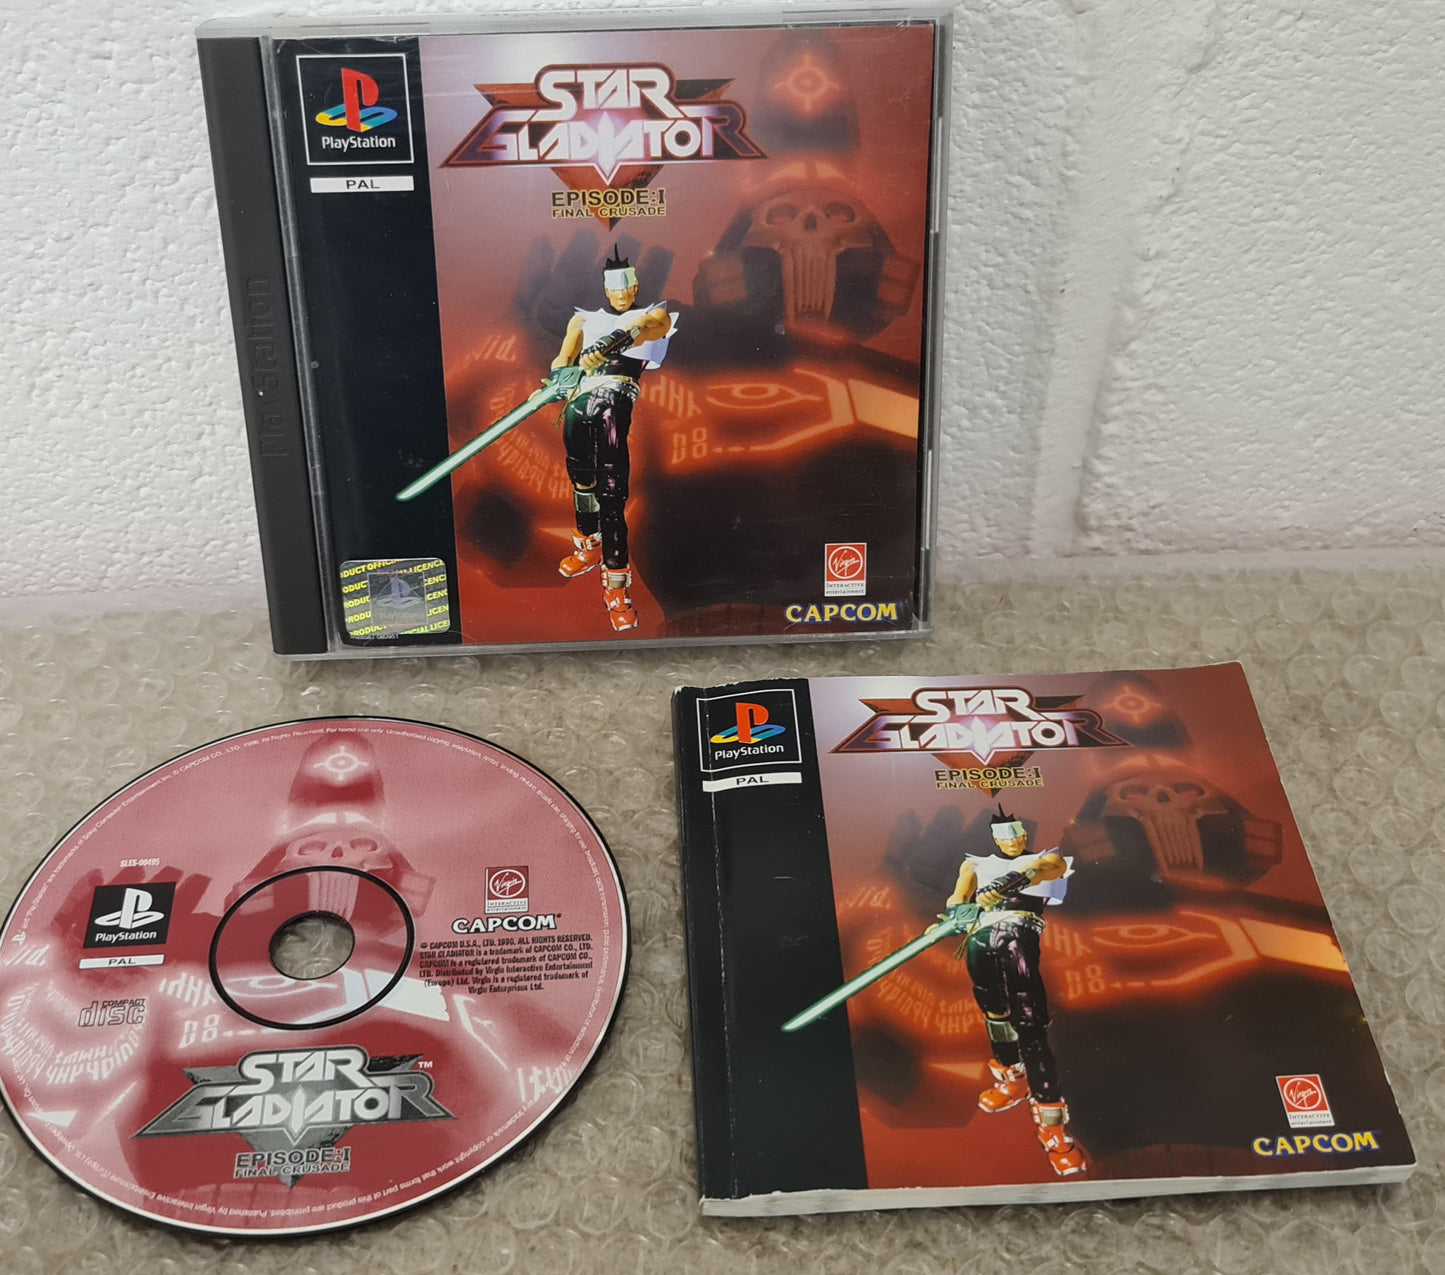 Star Gladiator Episode: 1 Final Crusade Sony Playstation 1 (PS1) Rare Game